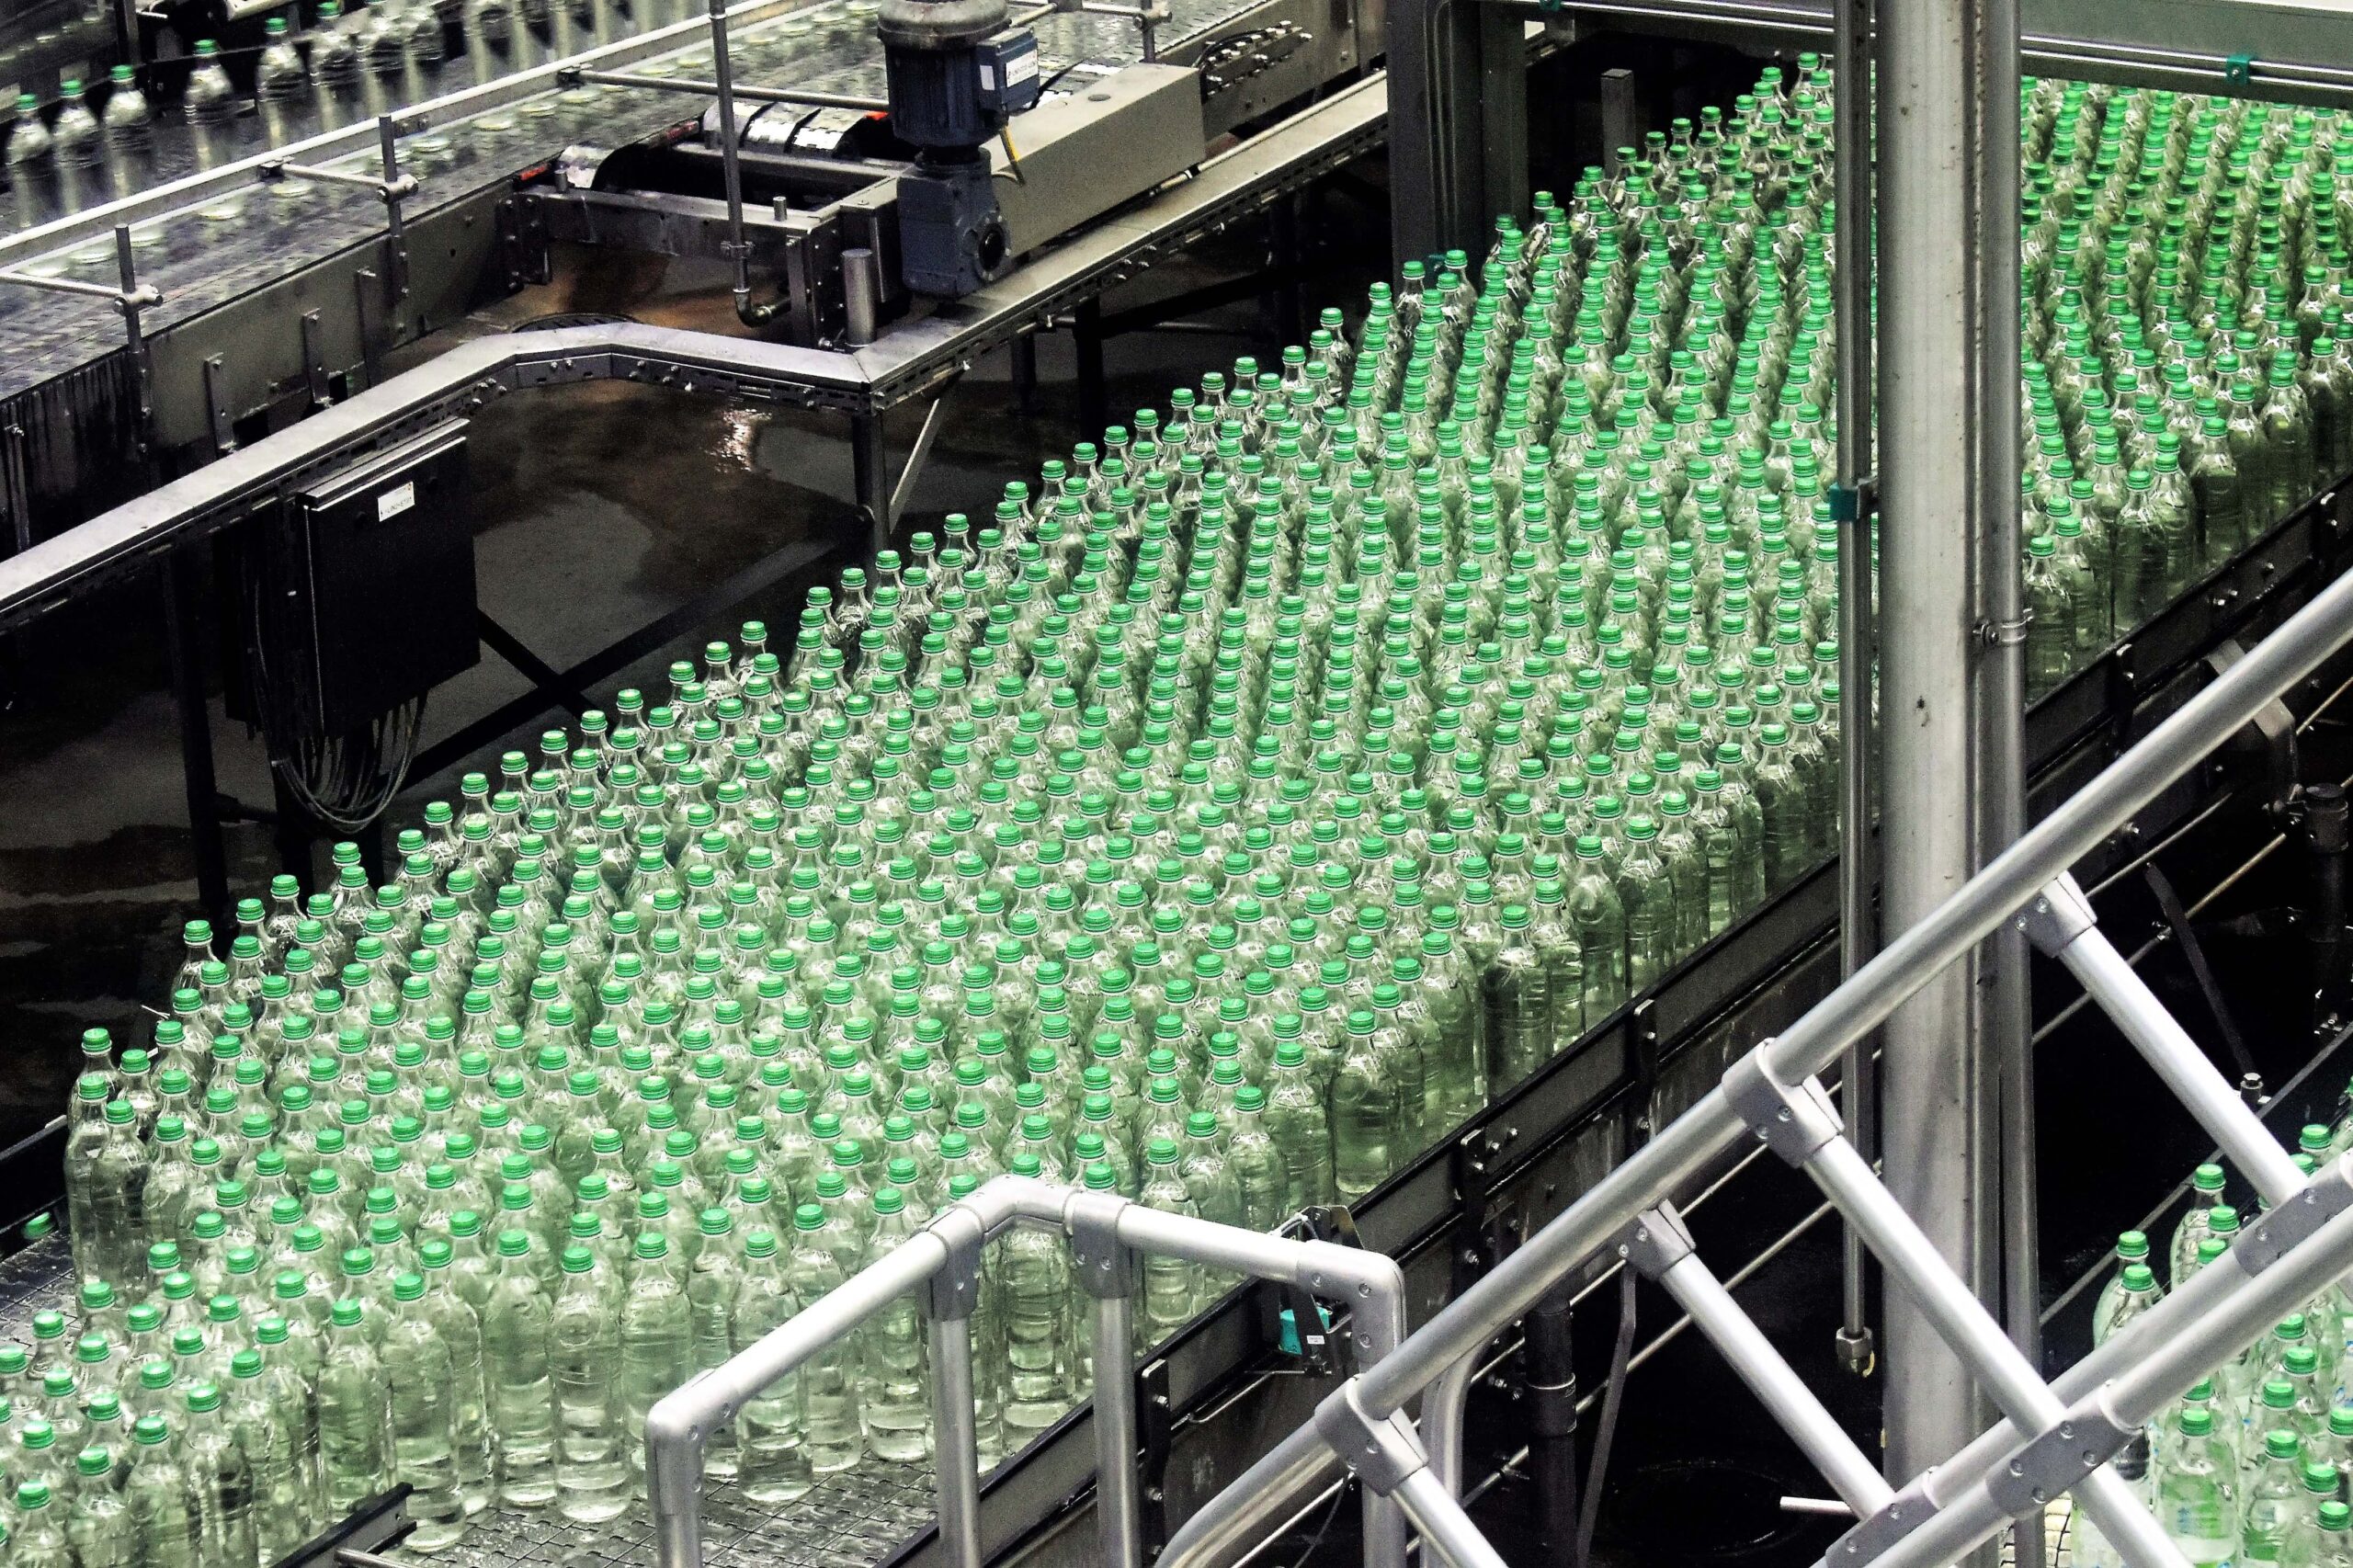 Assembly line with bottles.